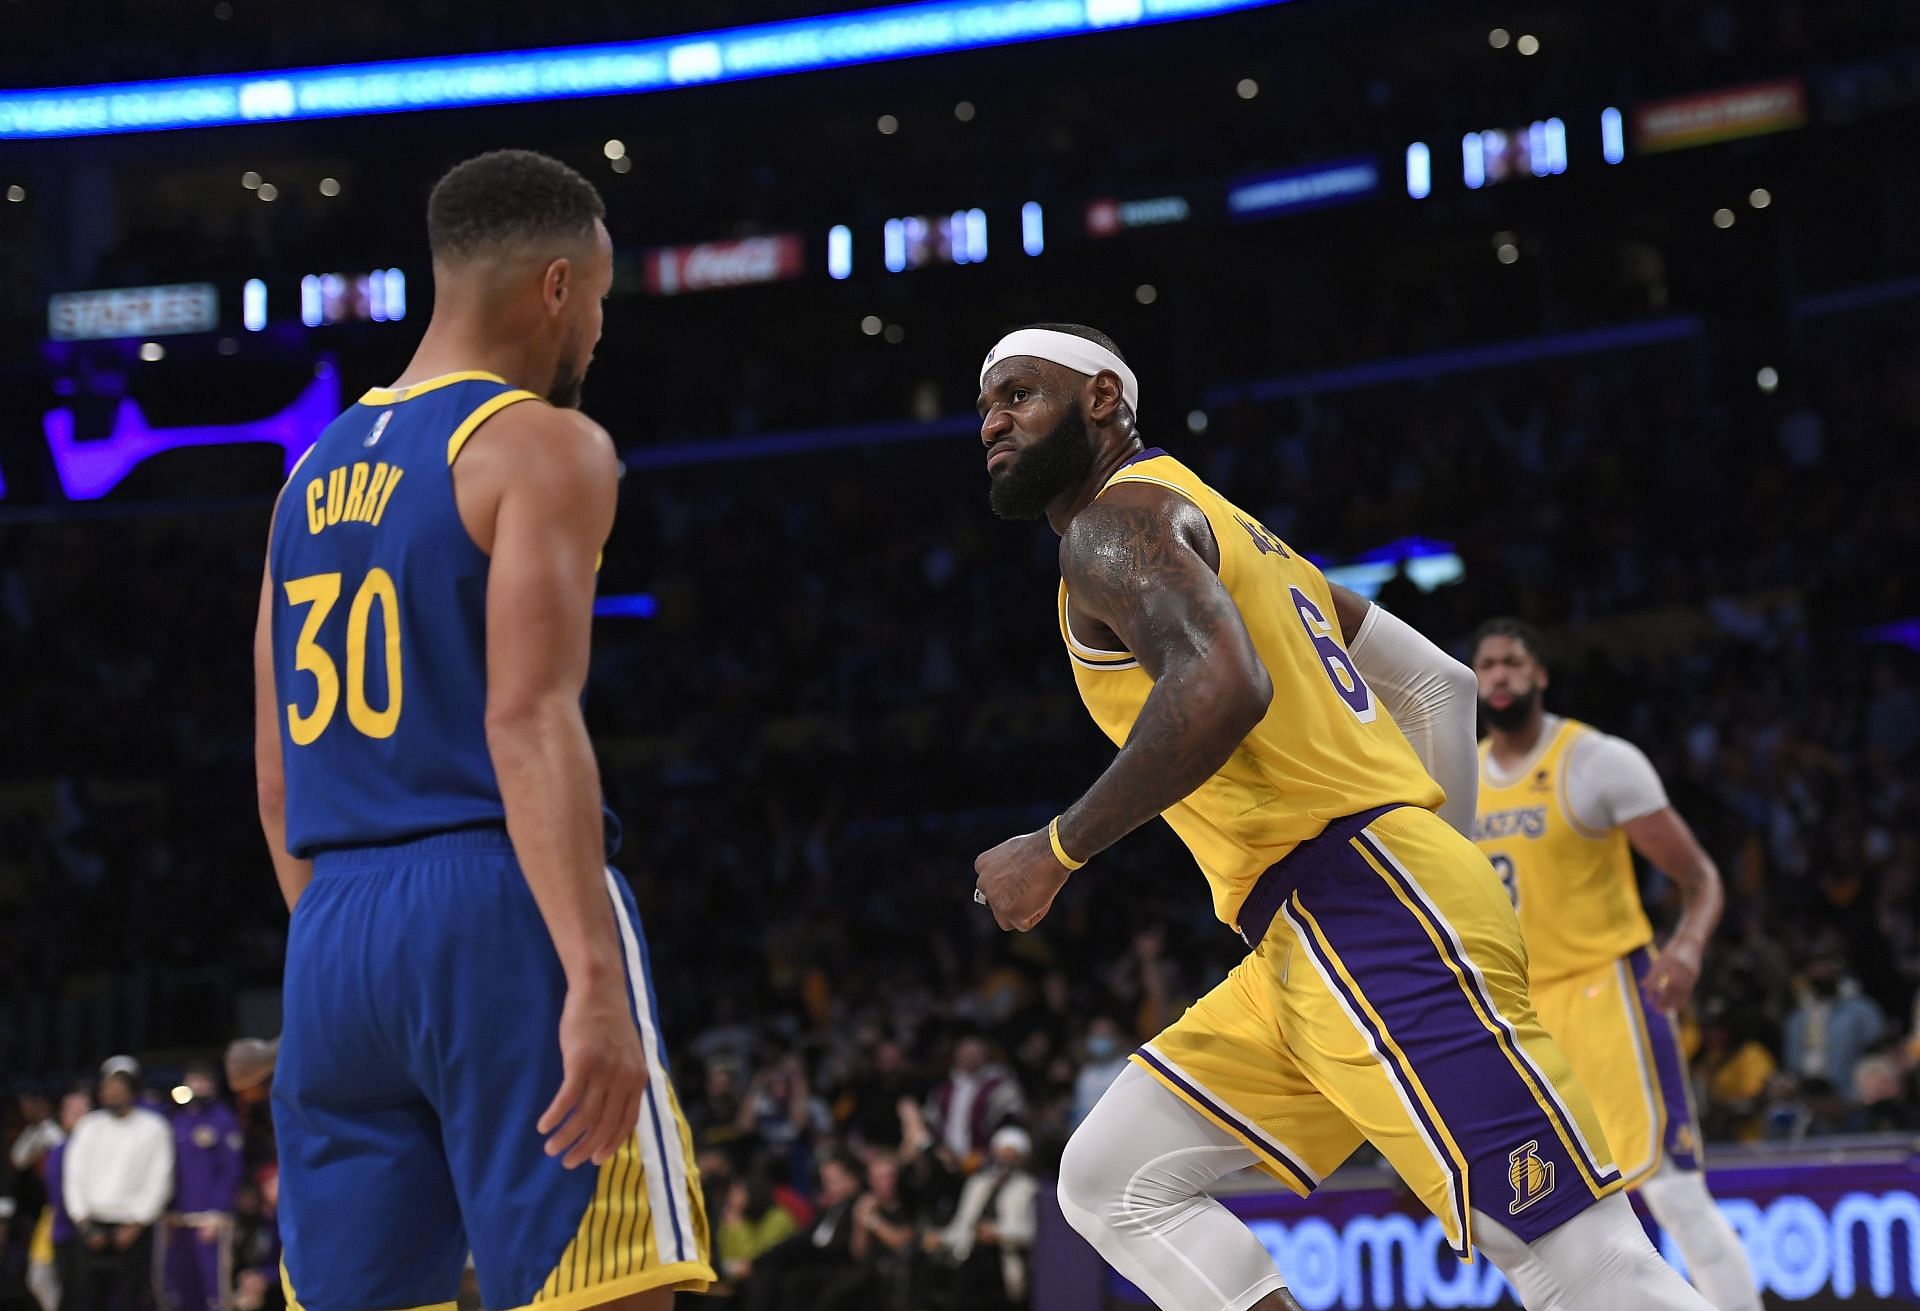 King James and Curry will be in action, according to NBA rumors